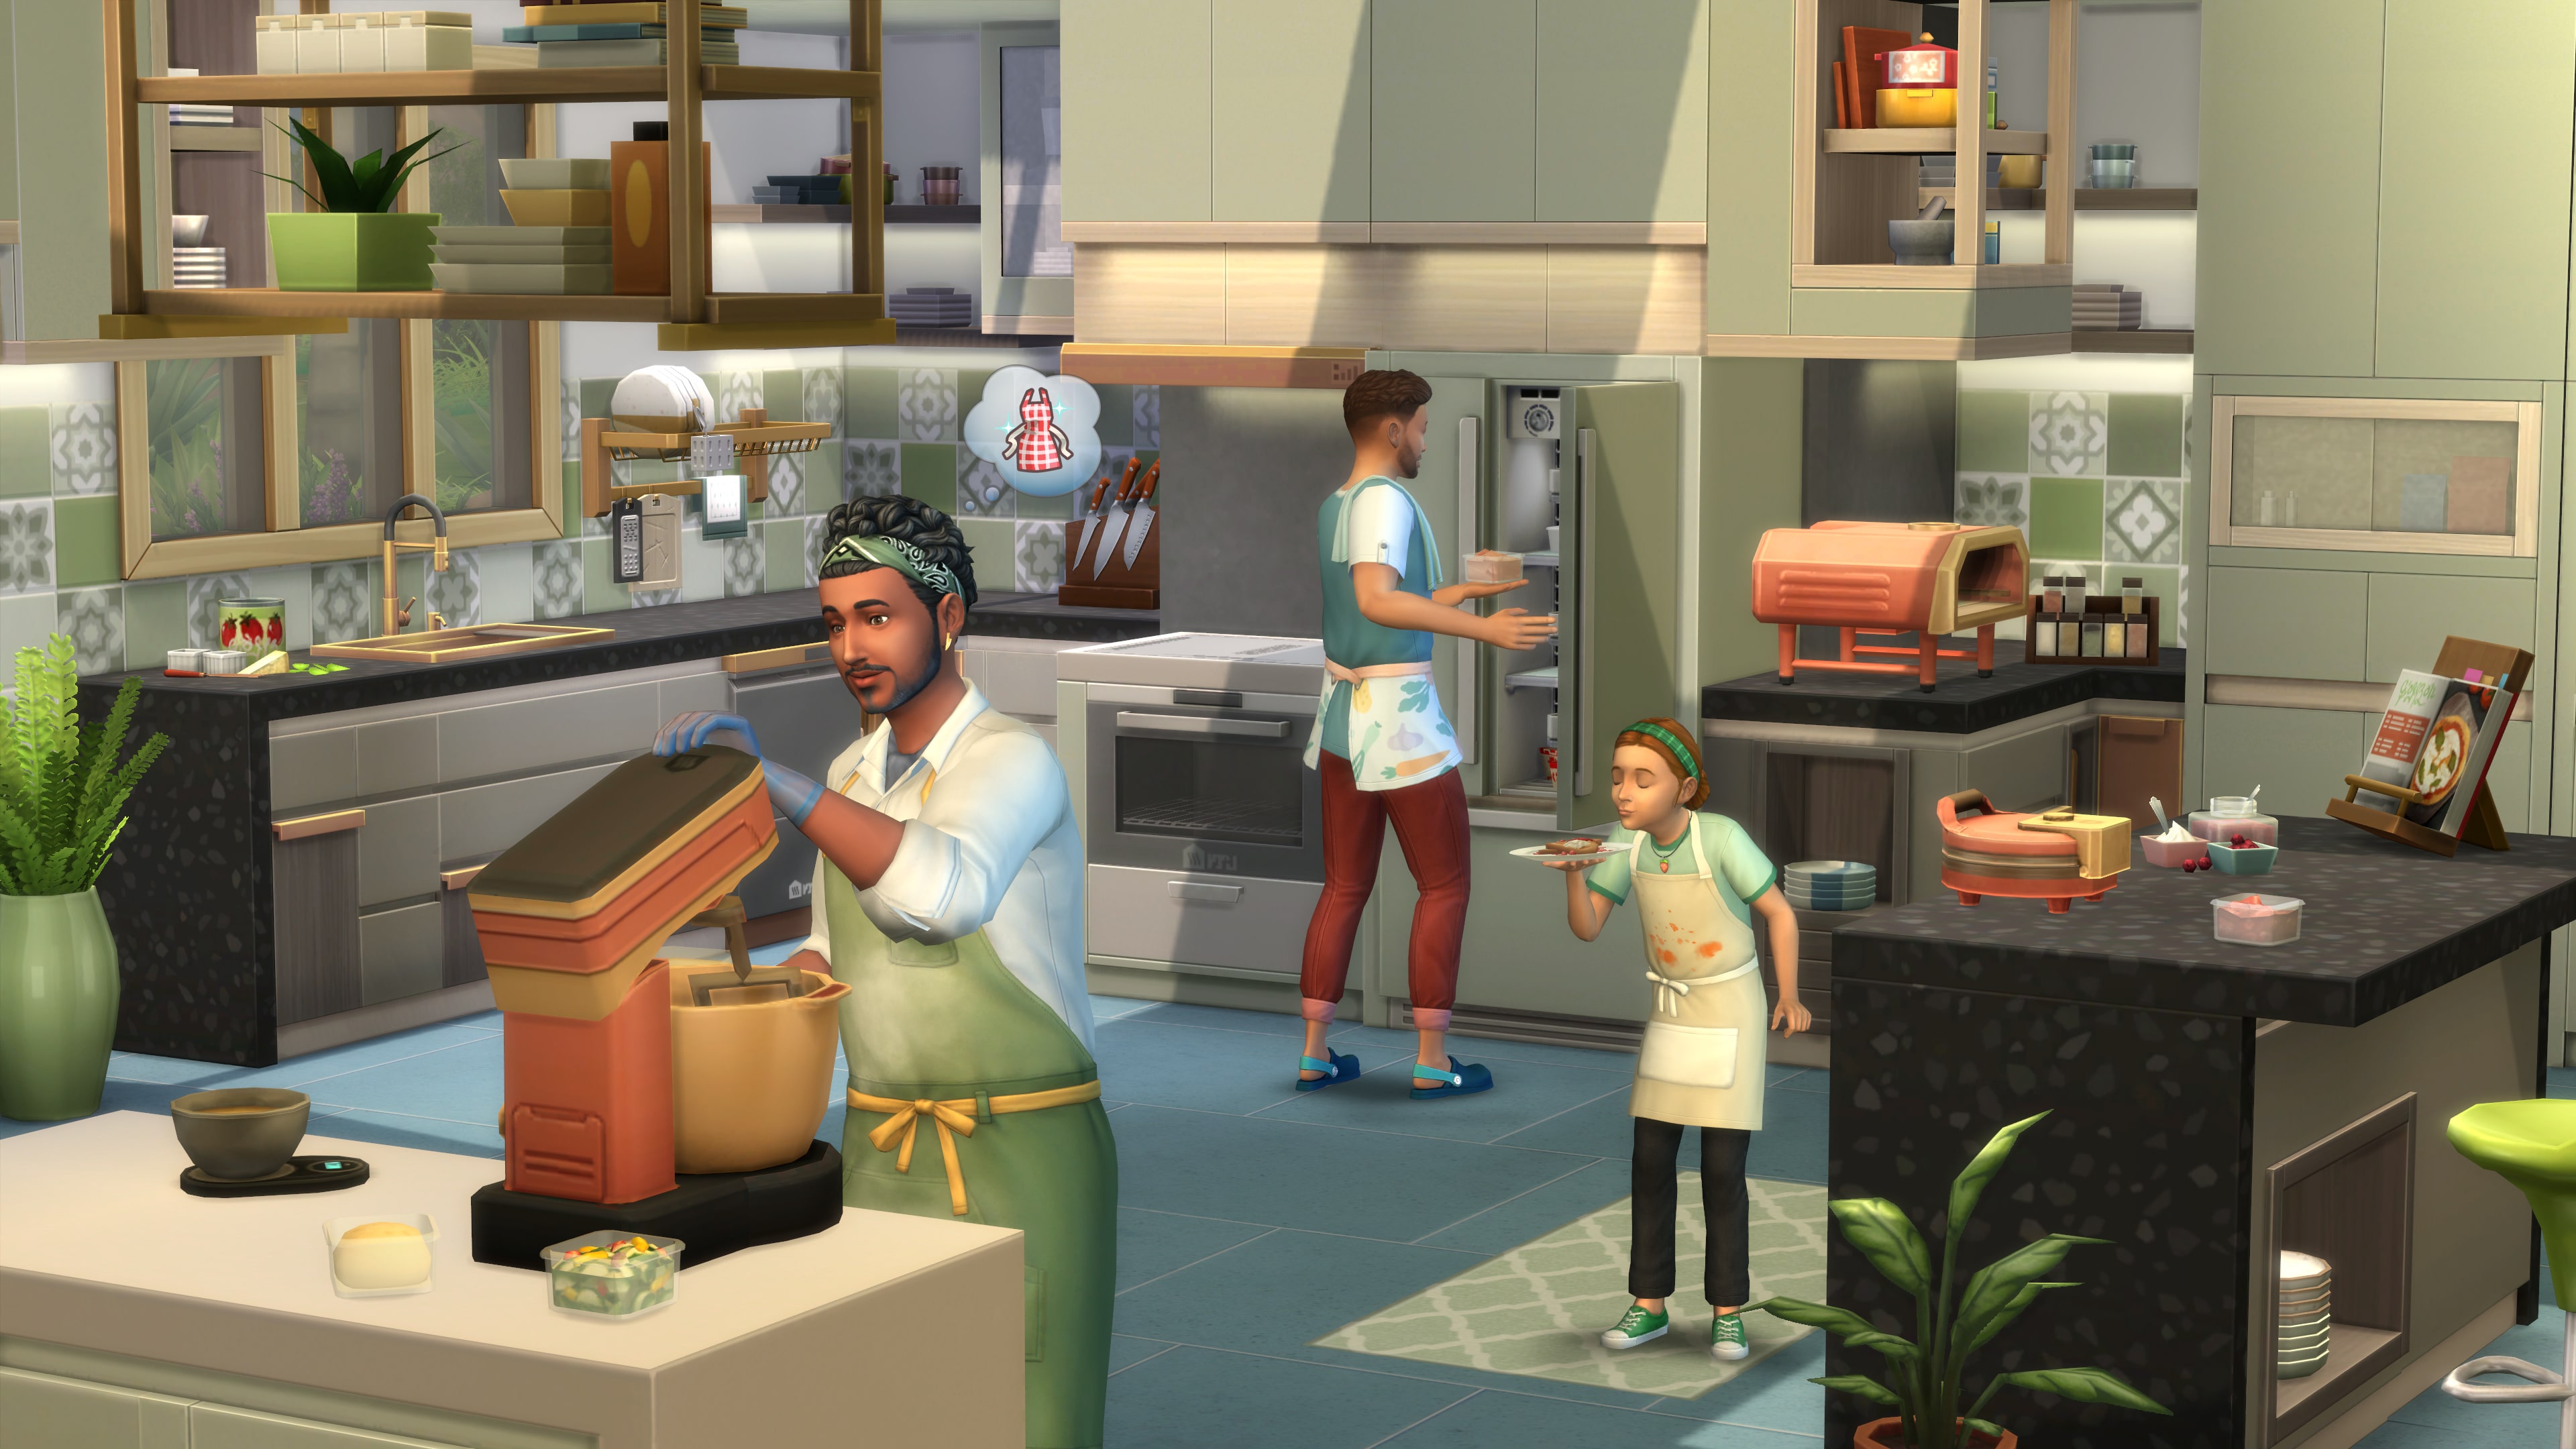 The Sims 4: Cool Kitchen Review